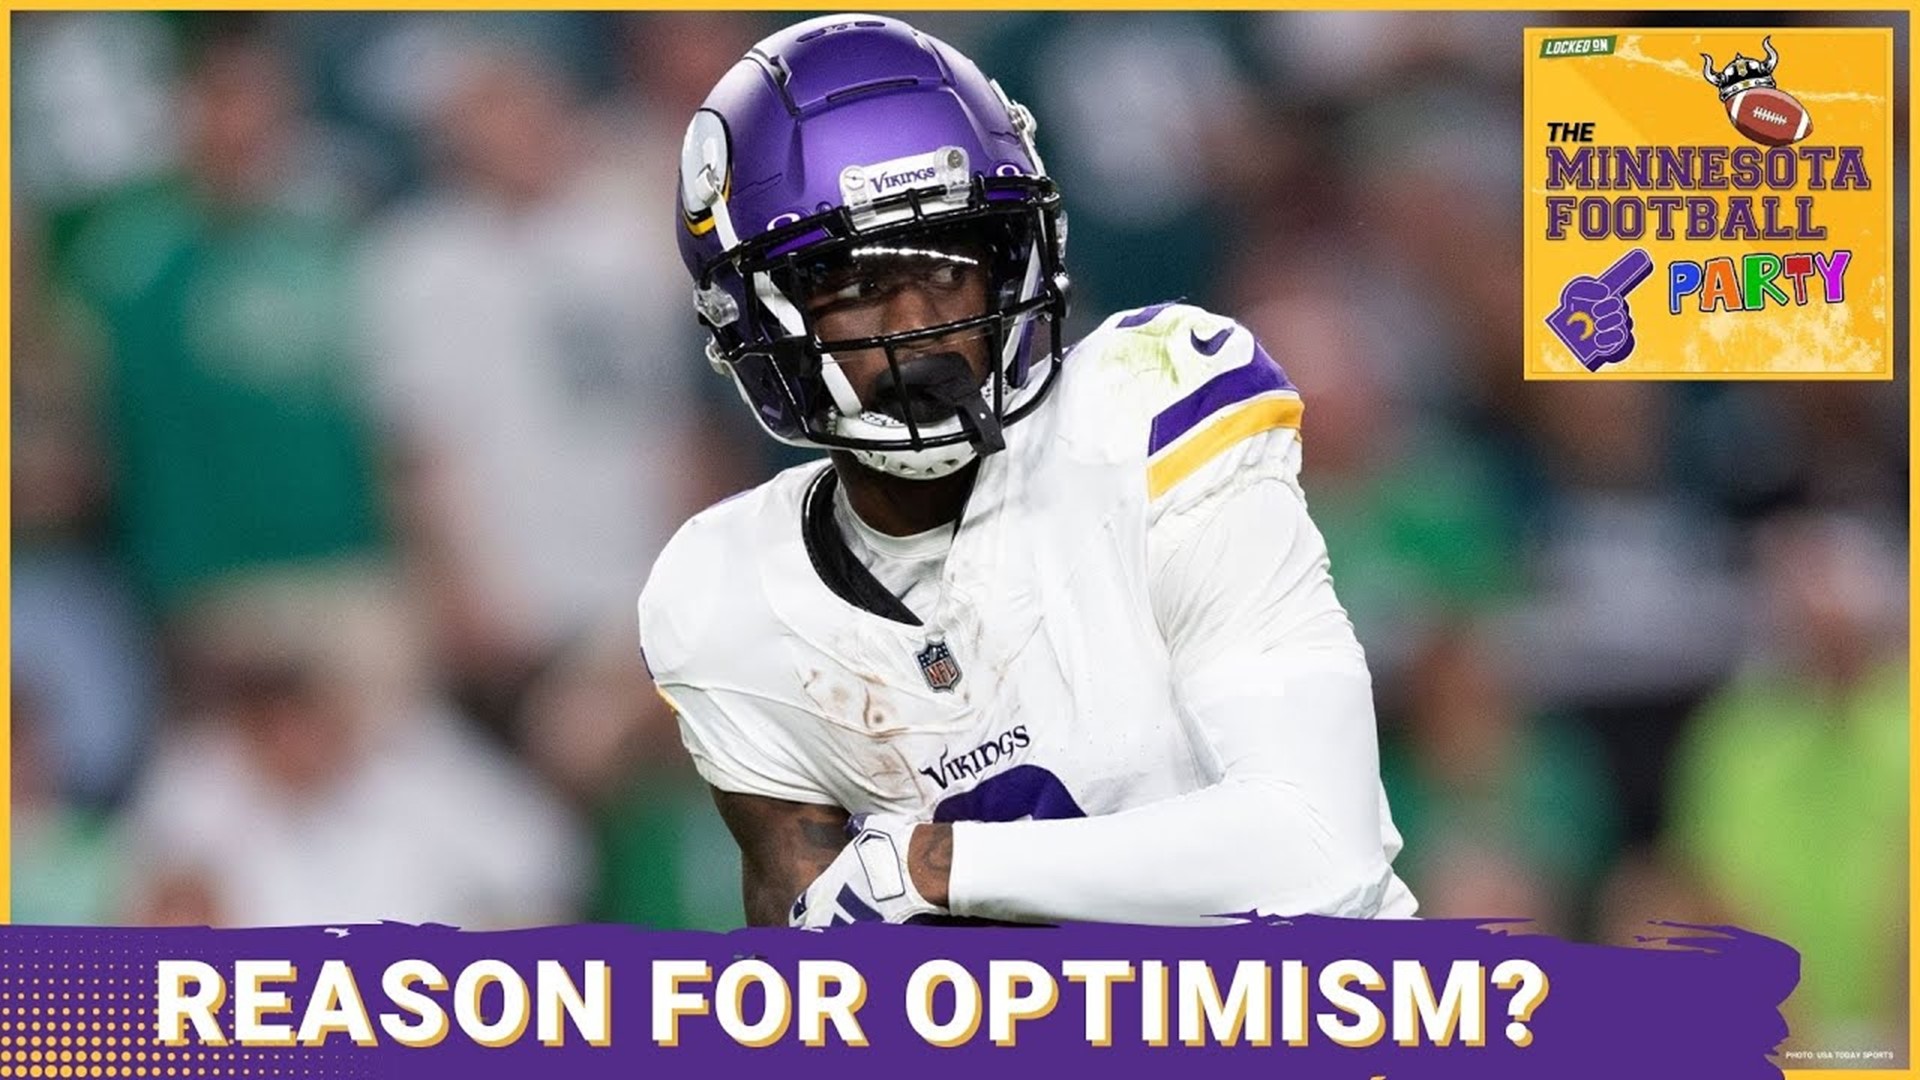 REASONS FOR OPTIMISM About the Minnesota Vikings 0-2 Start - The Minnesota Football Party